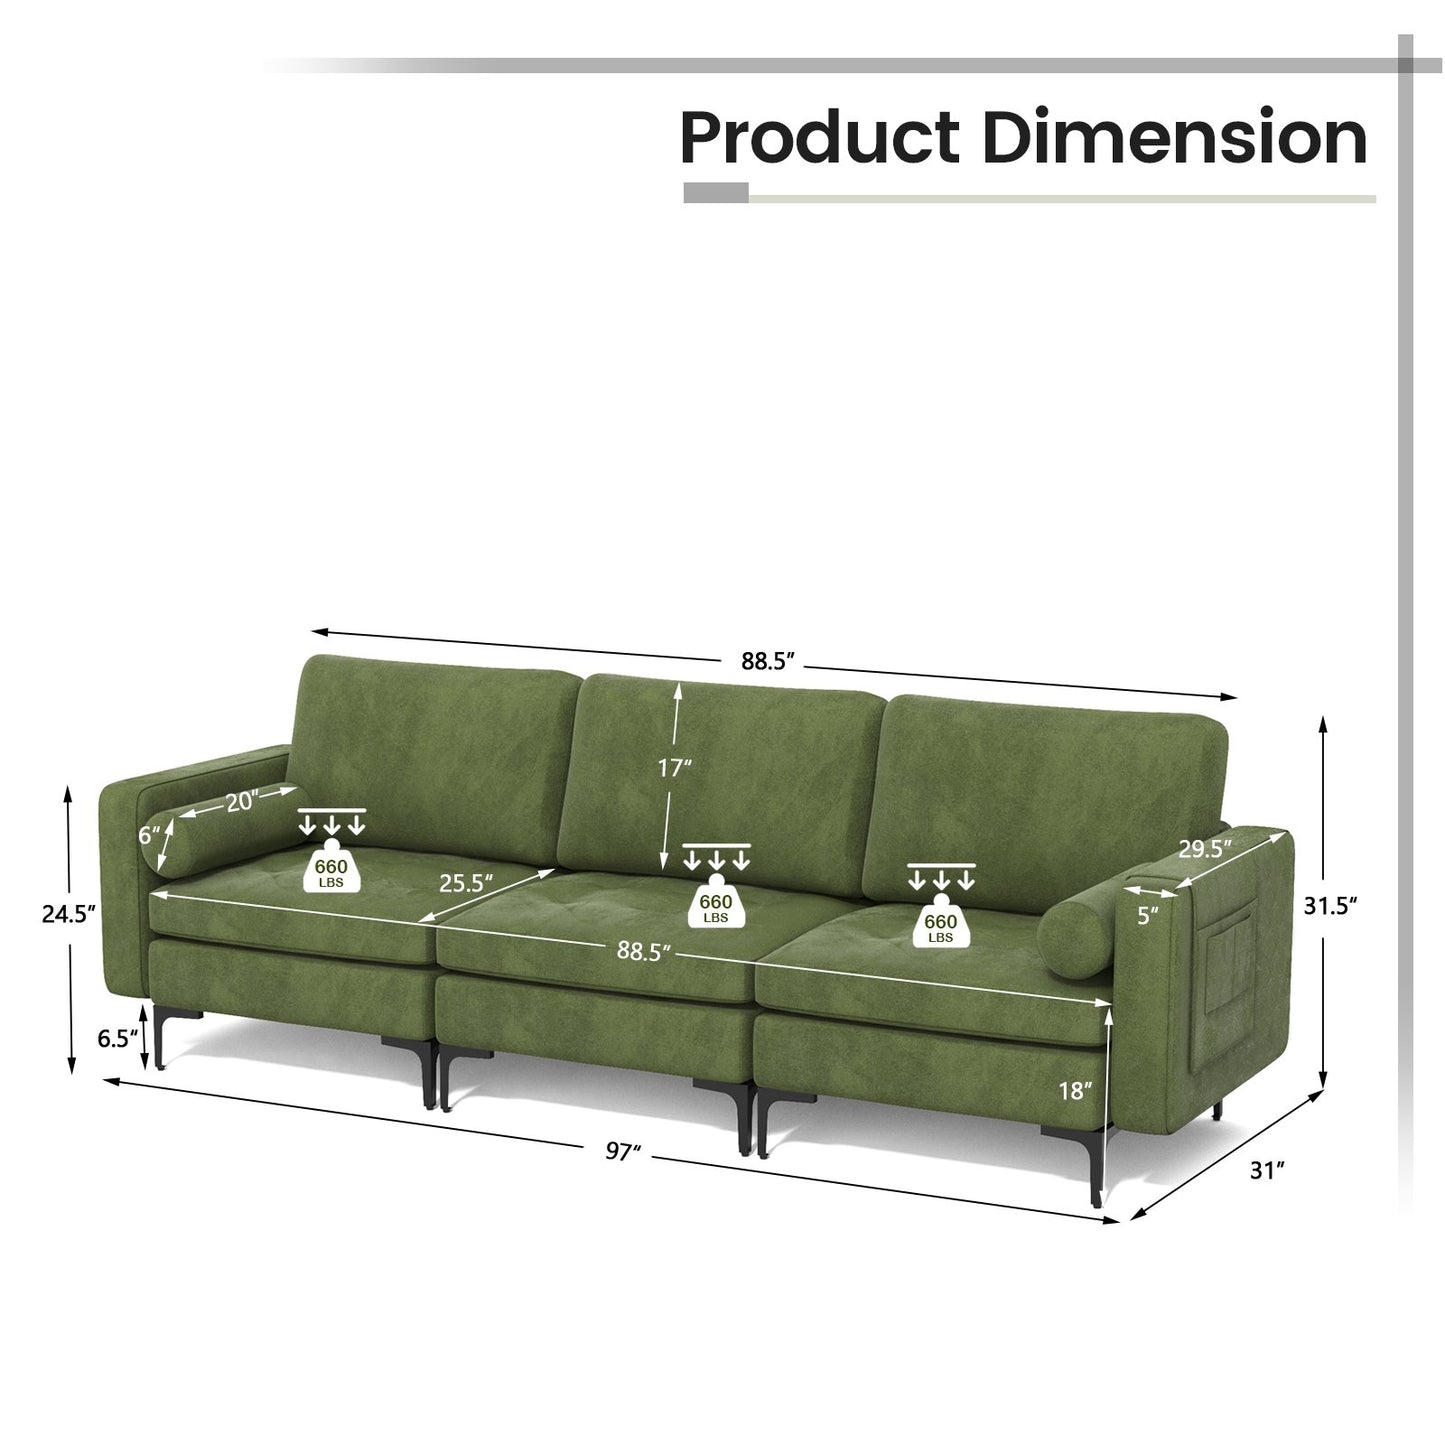 Modular 3-Seat Sofa Couch with Socket USB Ports and Side Storage Pocket, Green